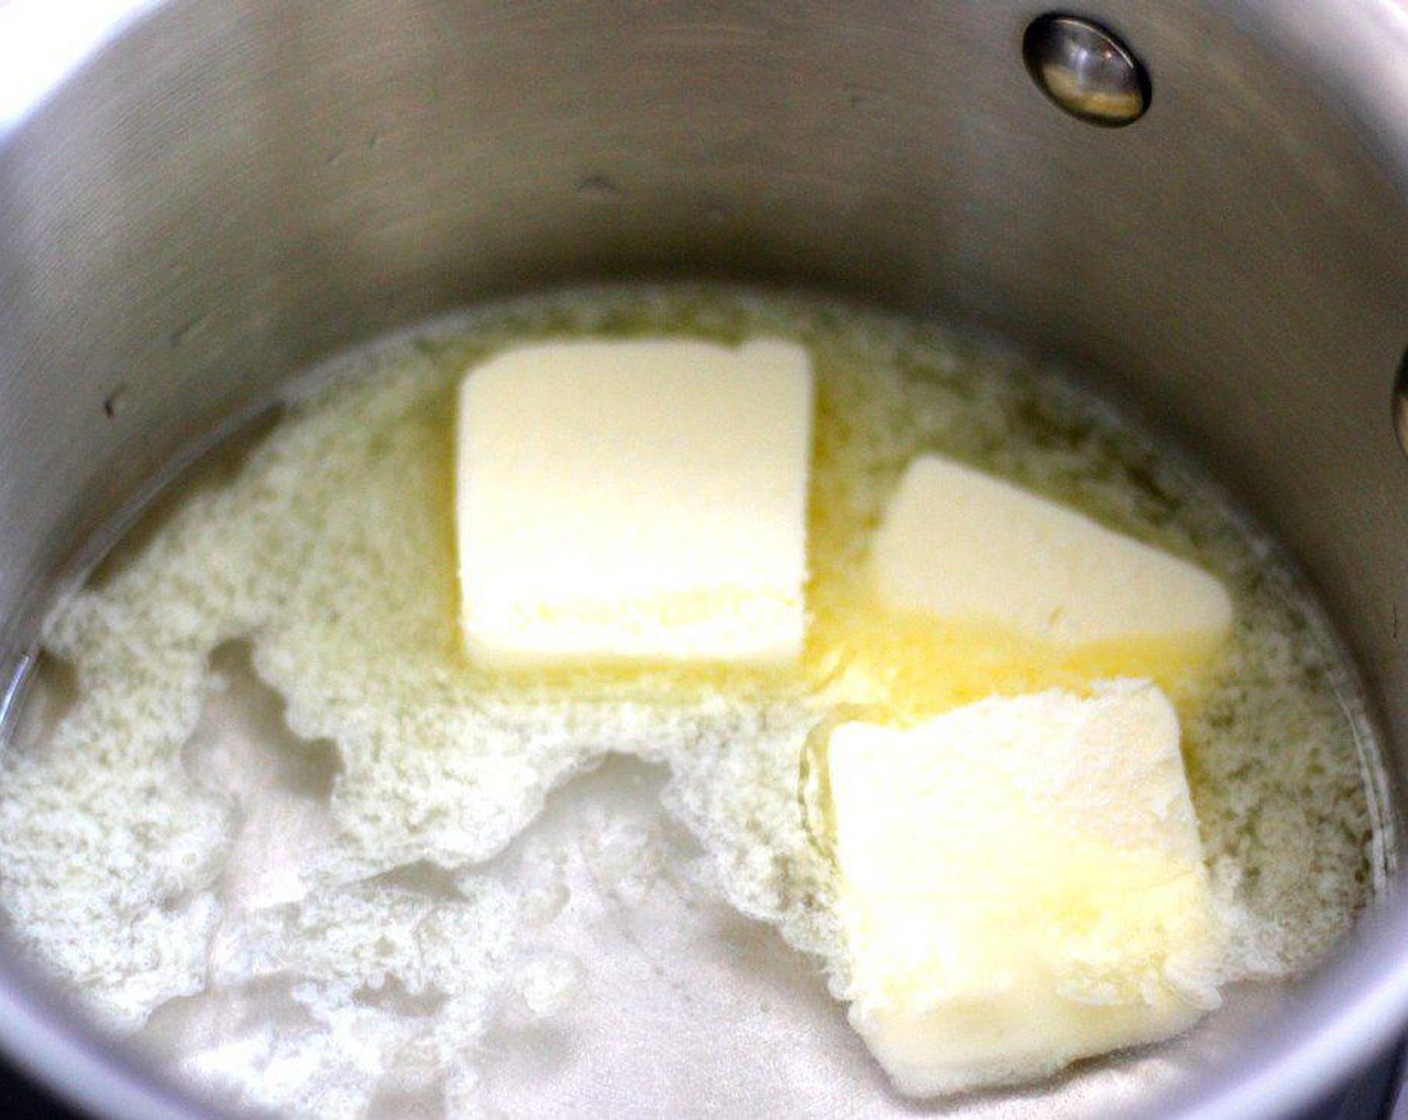 step 2 In a small heavy bottom saucepan on medium heat, add Water (1/2 cup), Unsalted Butter (1/4 cup), and Granulated Sugar (1 tsp).